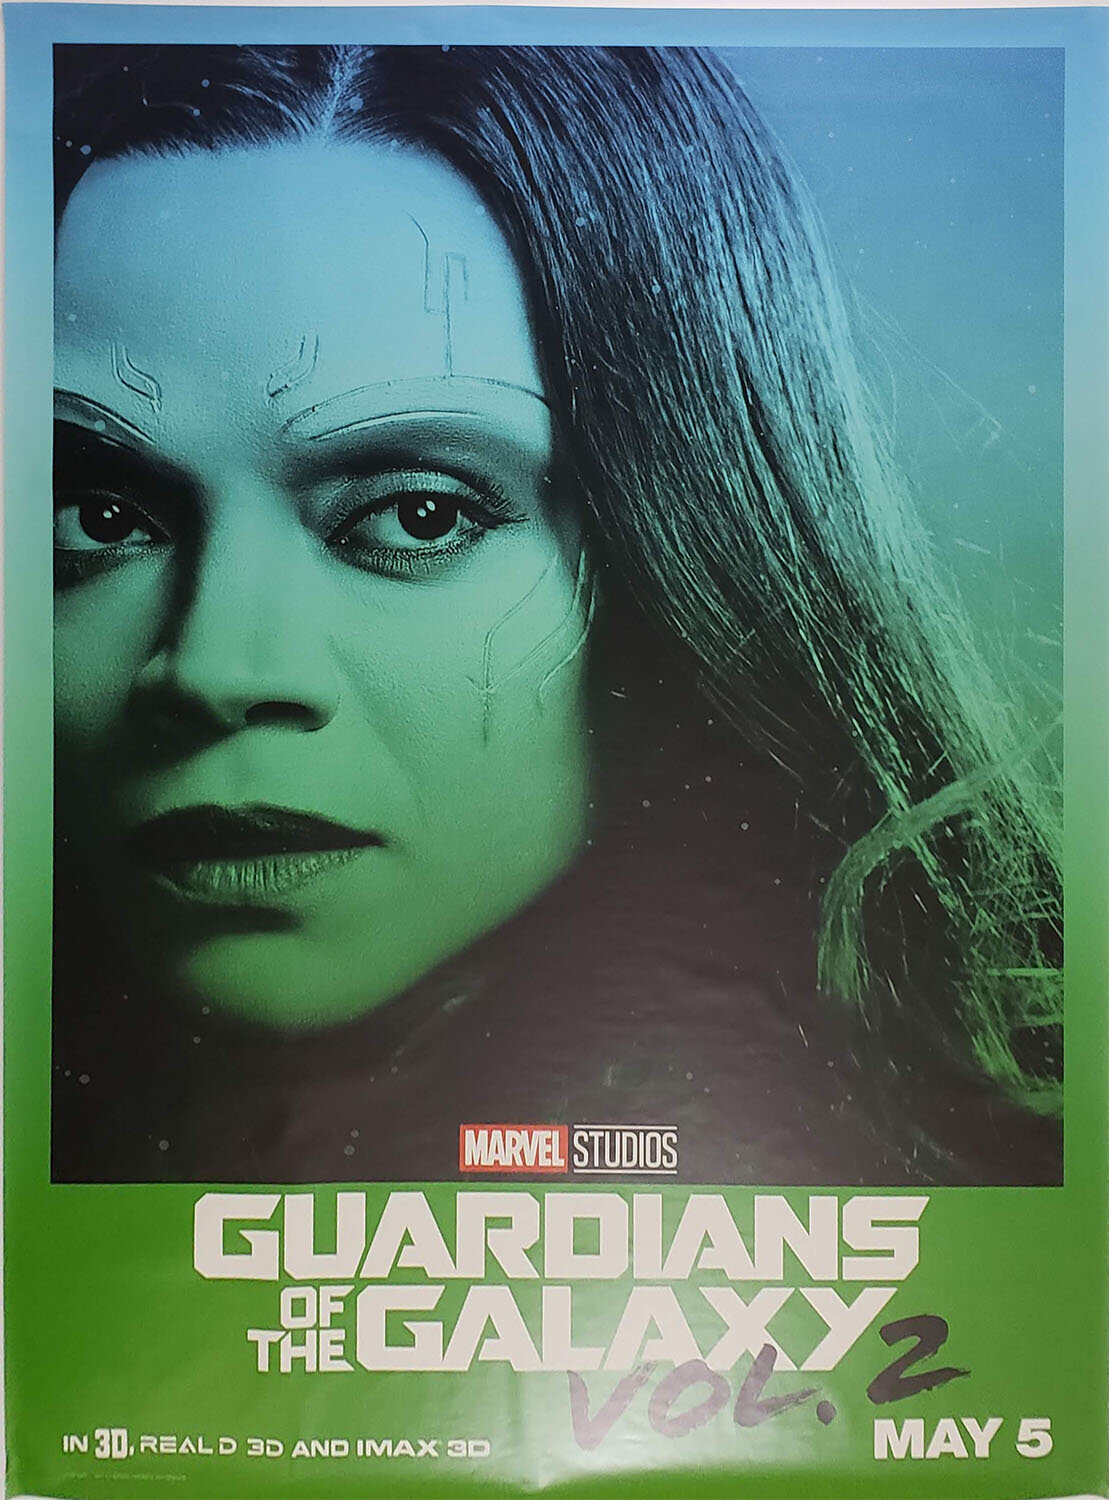 Gamora-Guardians-of-the-galaxy-Wilding-poster